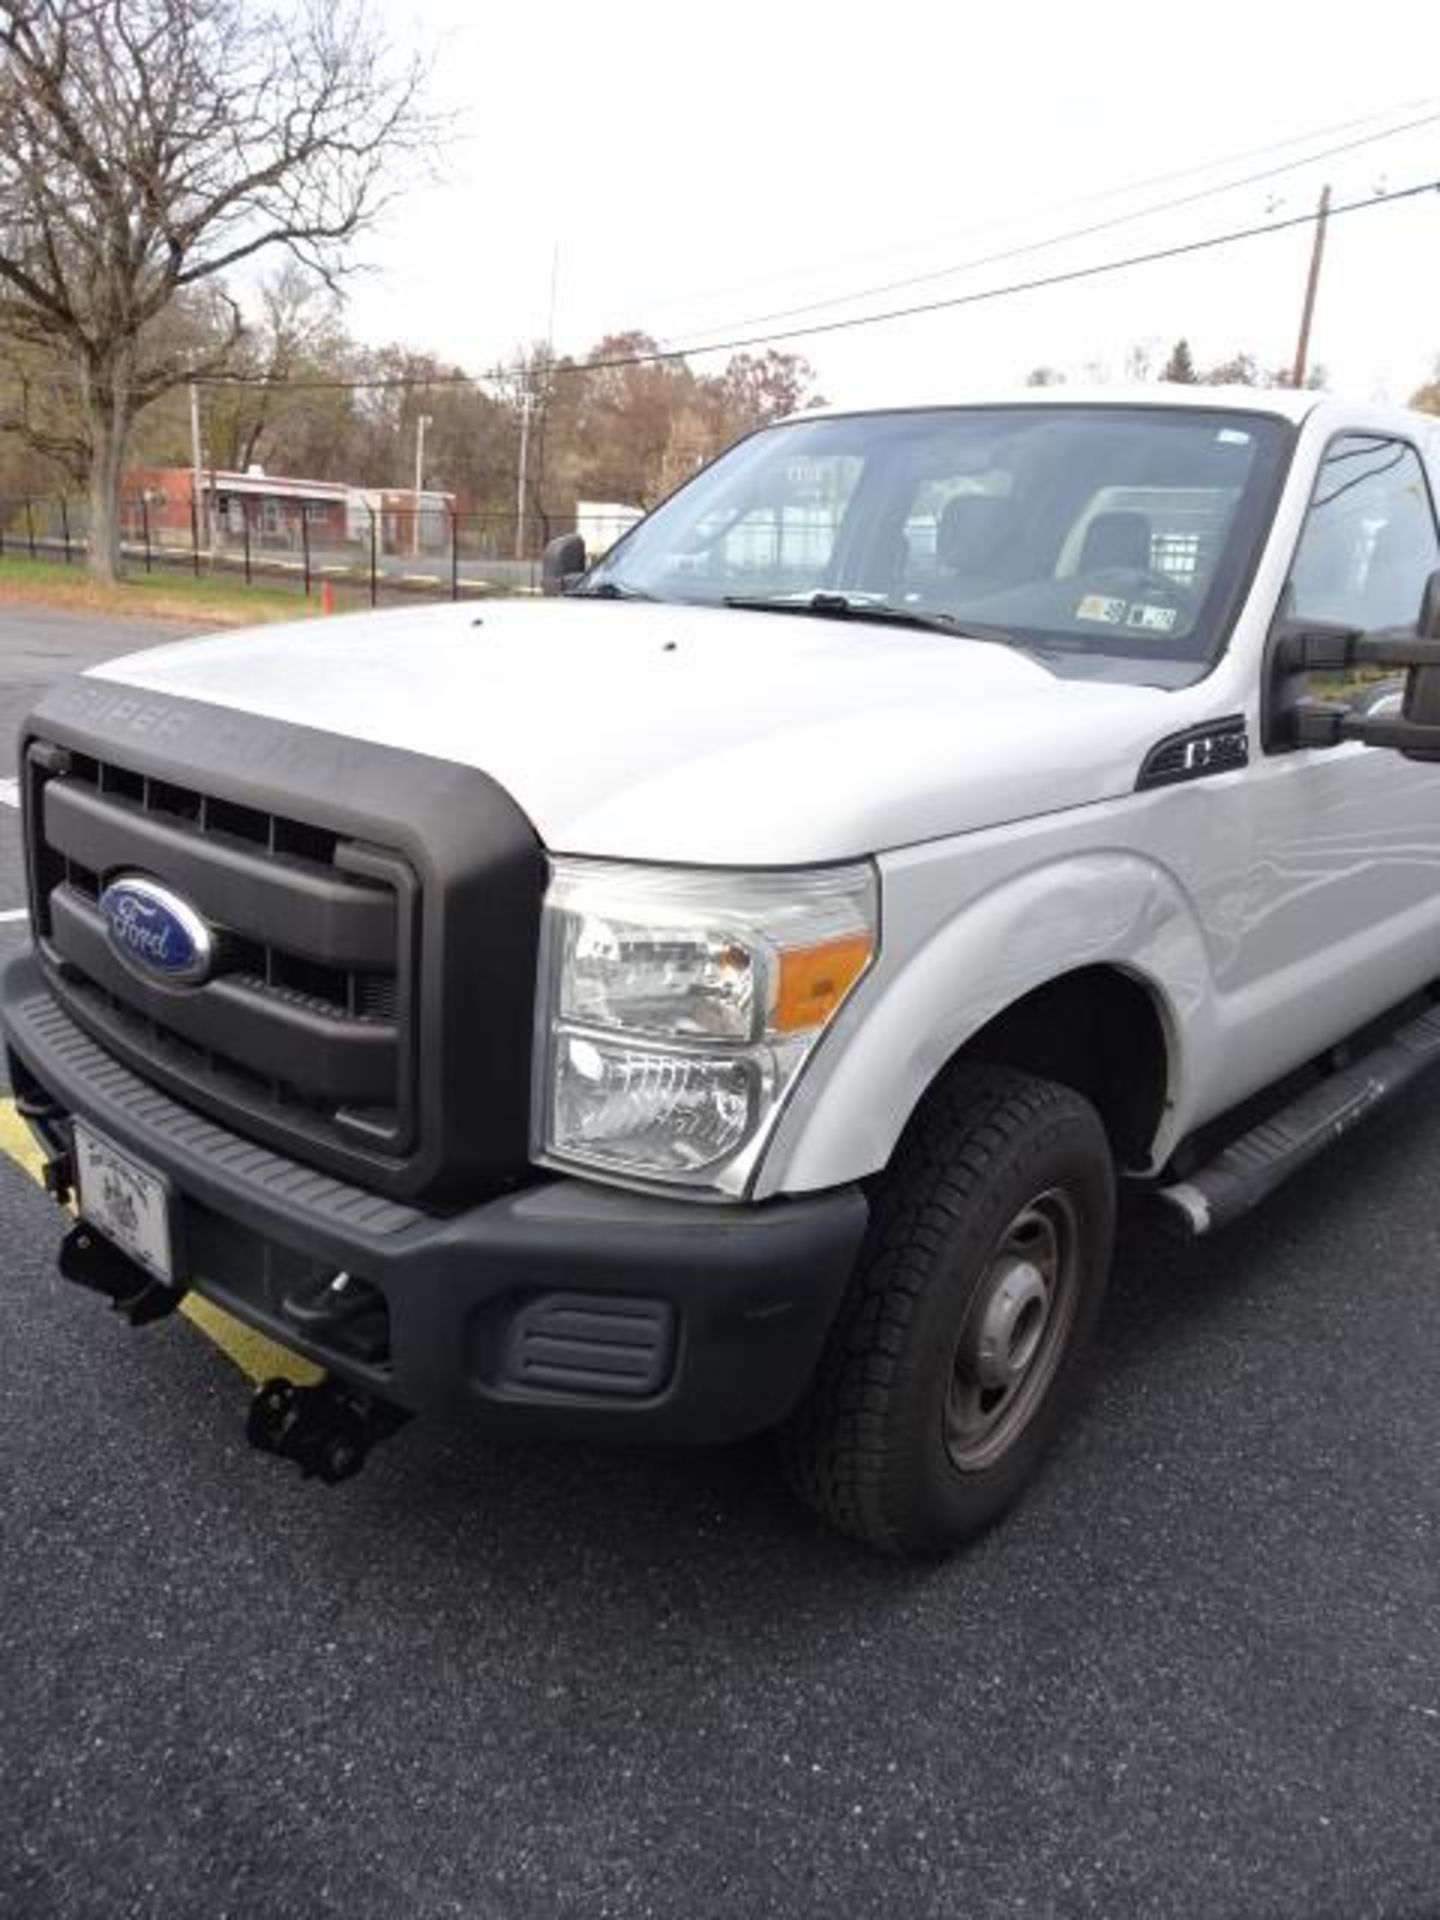 Ford F-350 Superduty Pickup Truck - Image 2 of 13